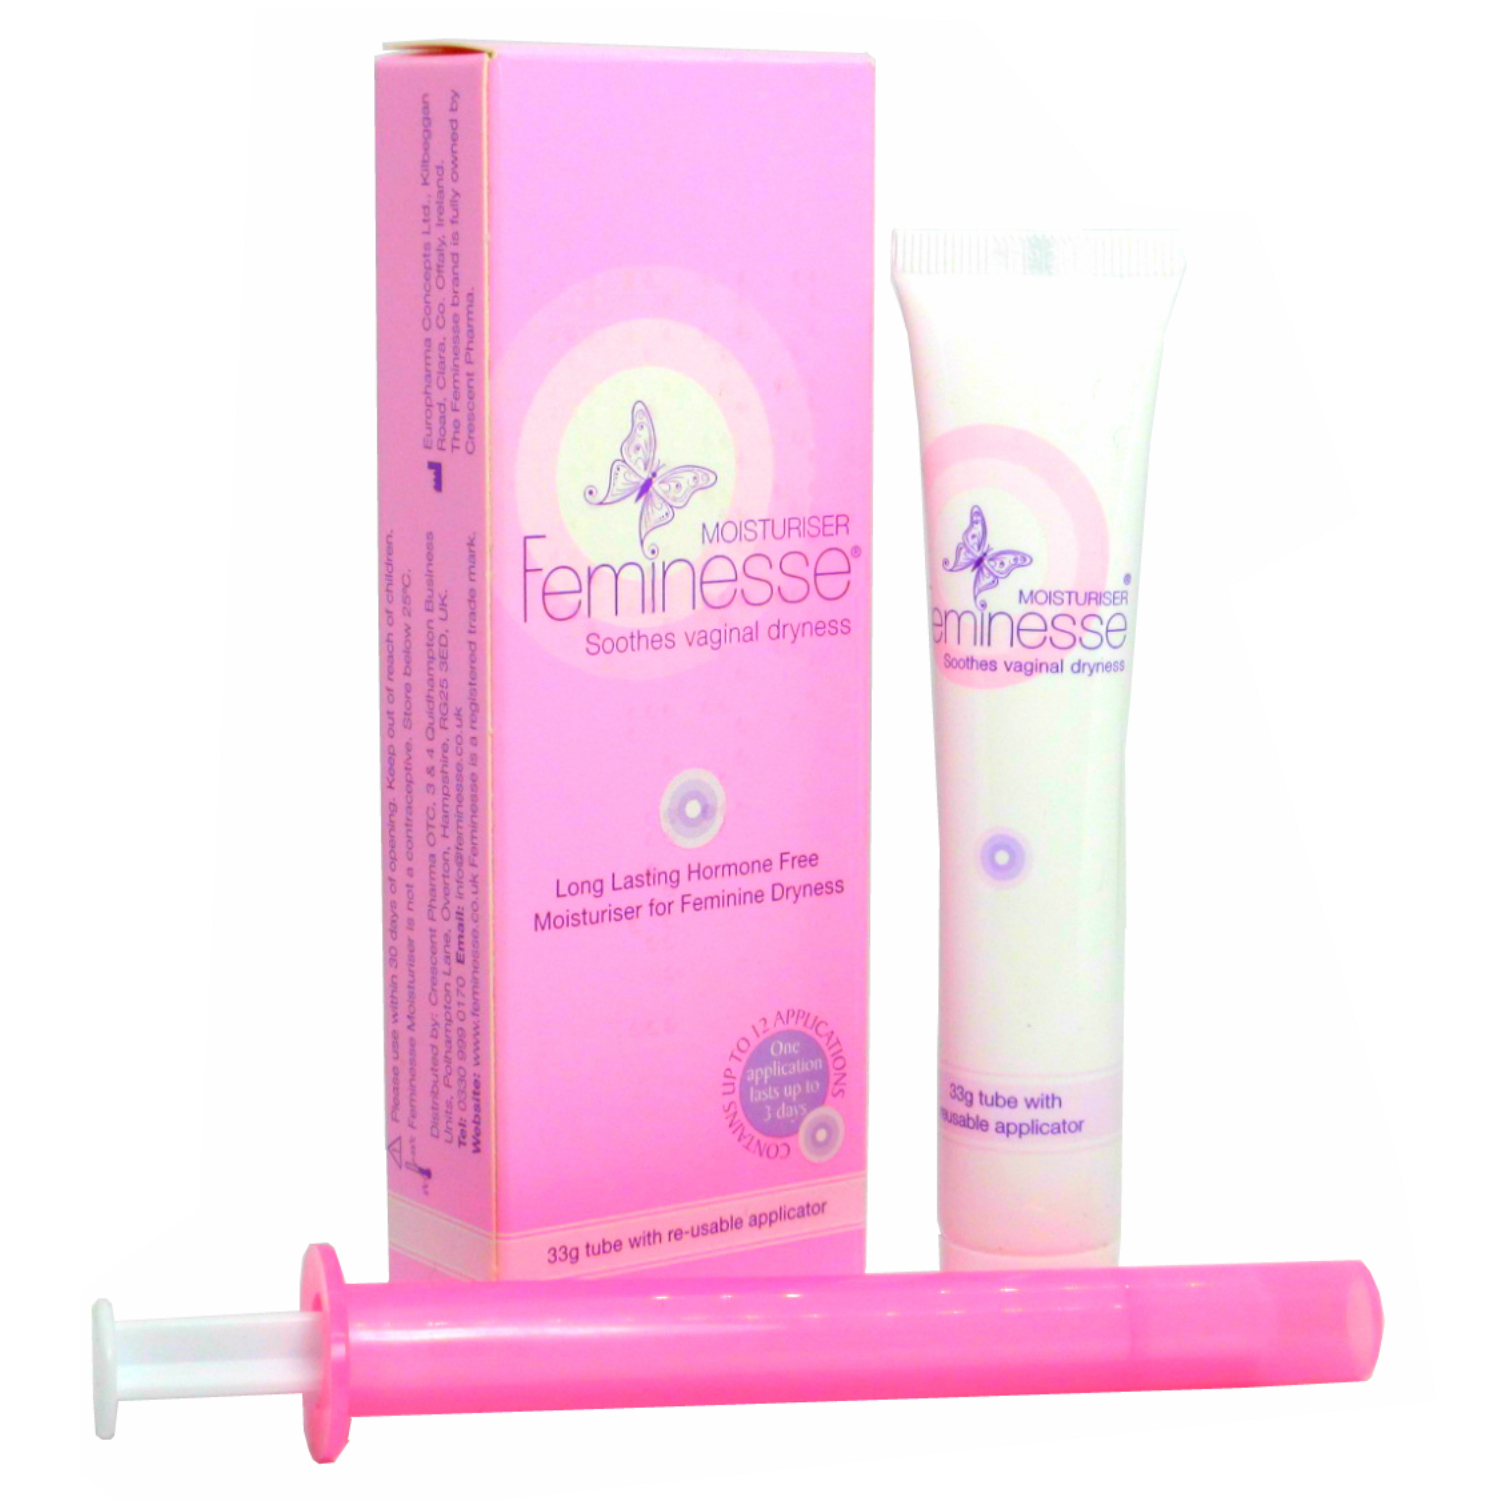 Feminesse Moisturiser 33g, Soothes Vaginal Dryness + Re-Usable Applicator | Home Health UK1500 x 1500